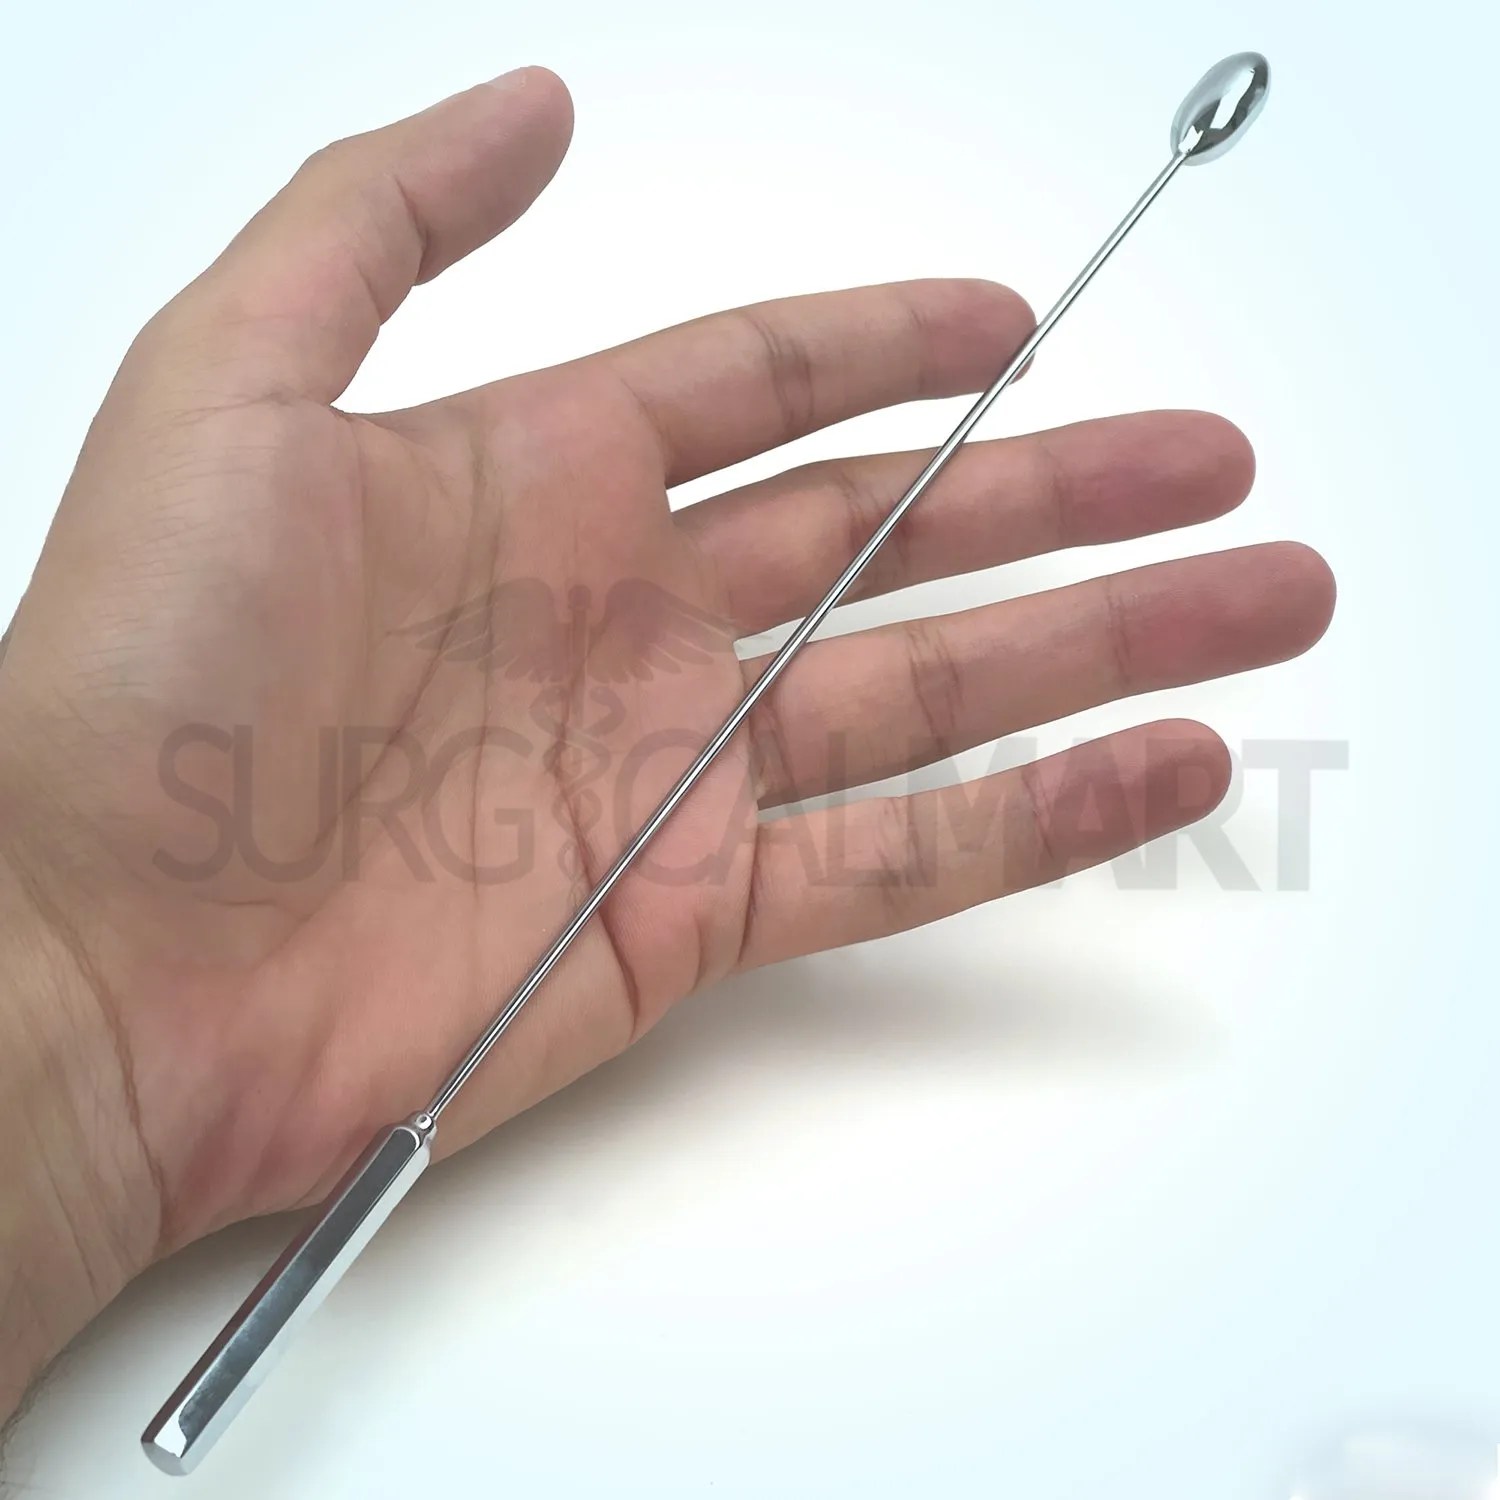 beverly diehl add photo pictures of urethral sounding